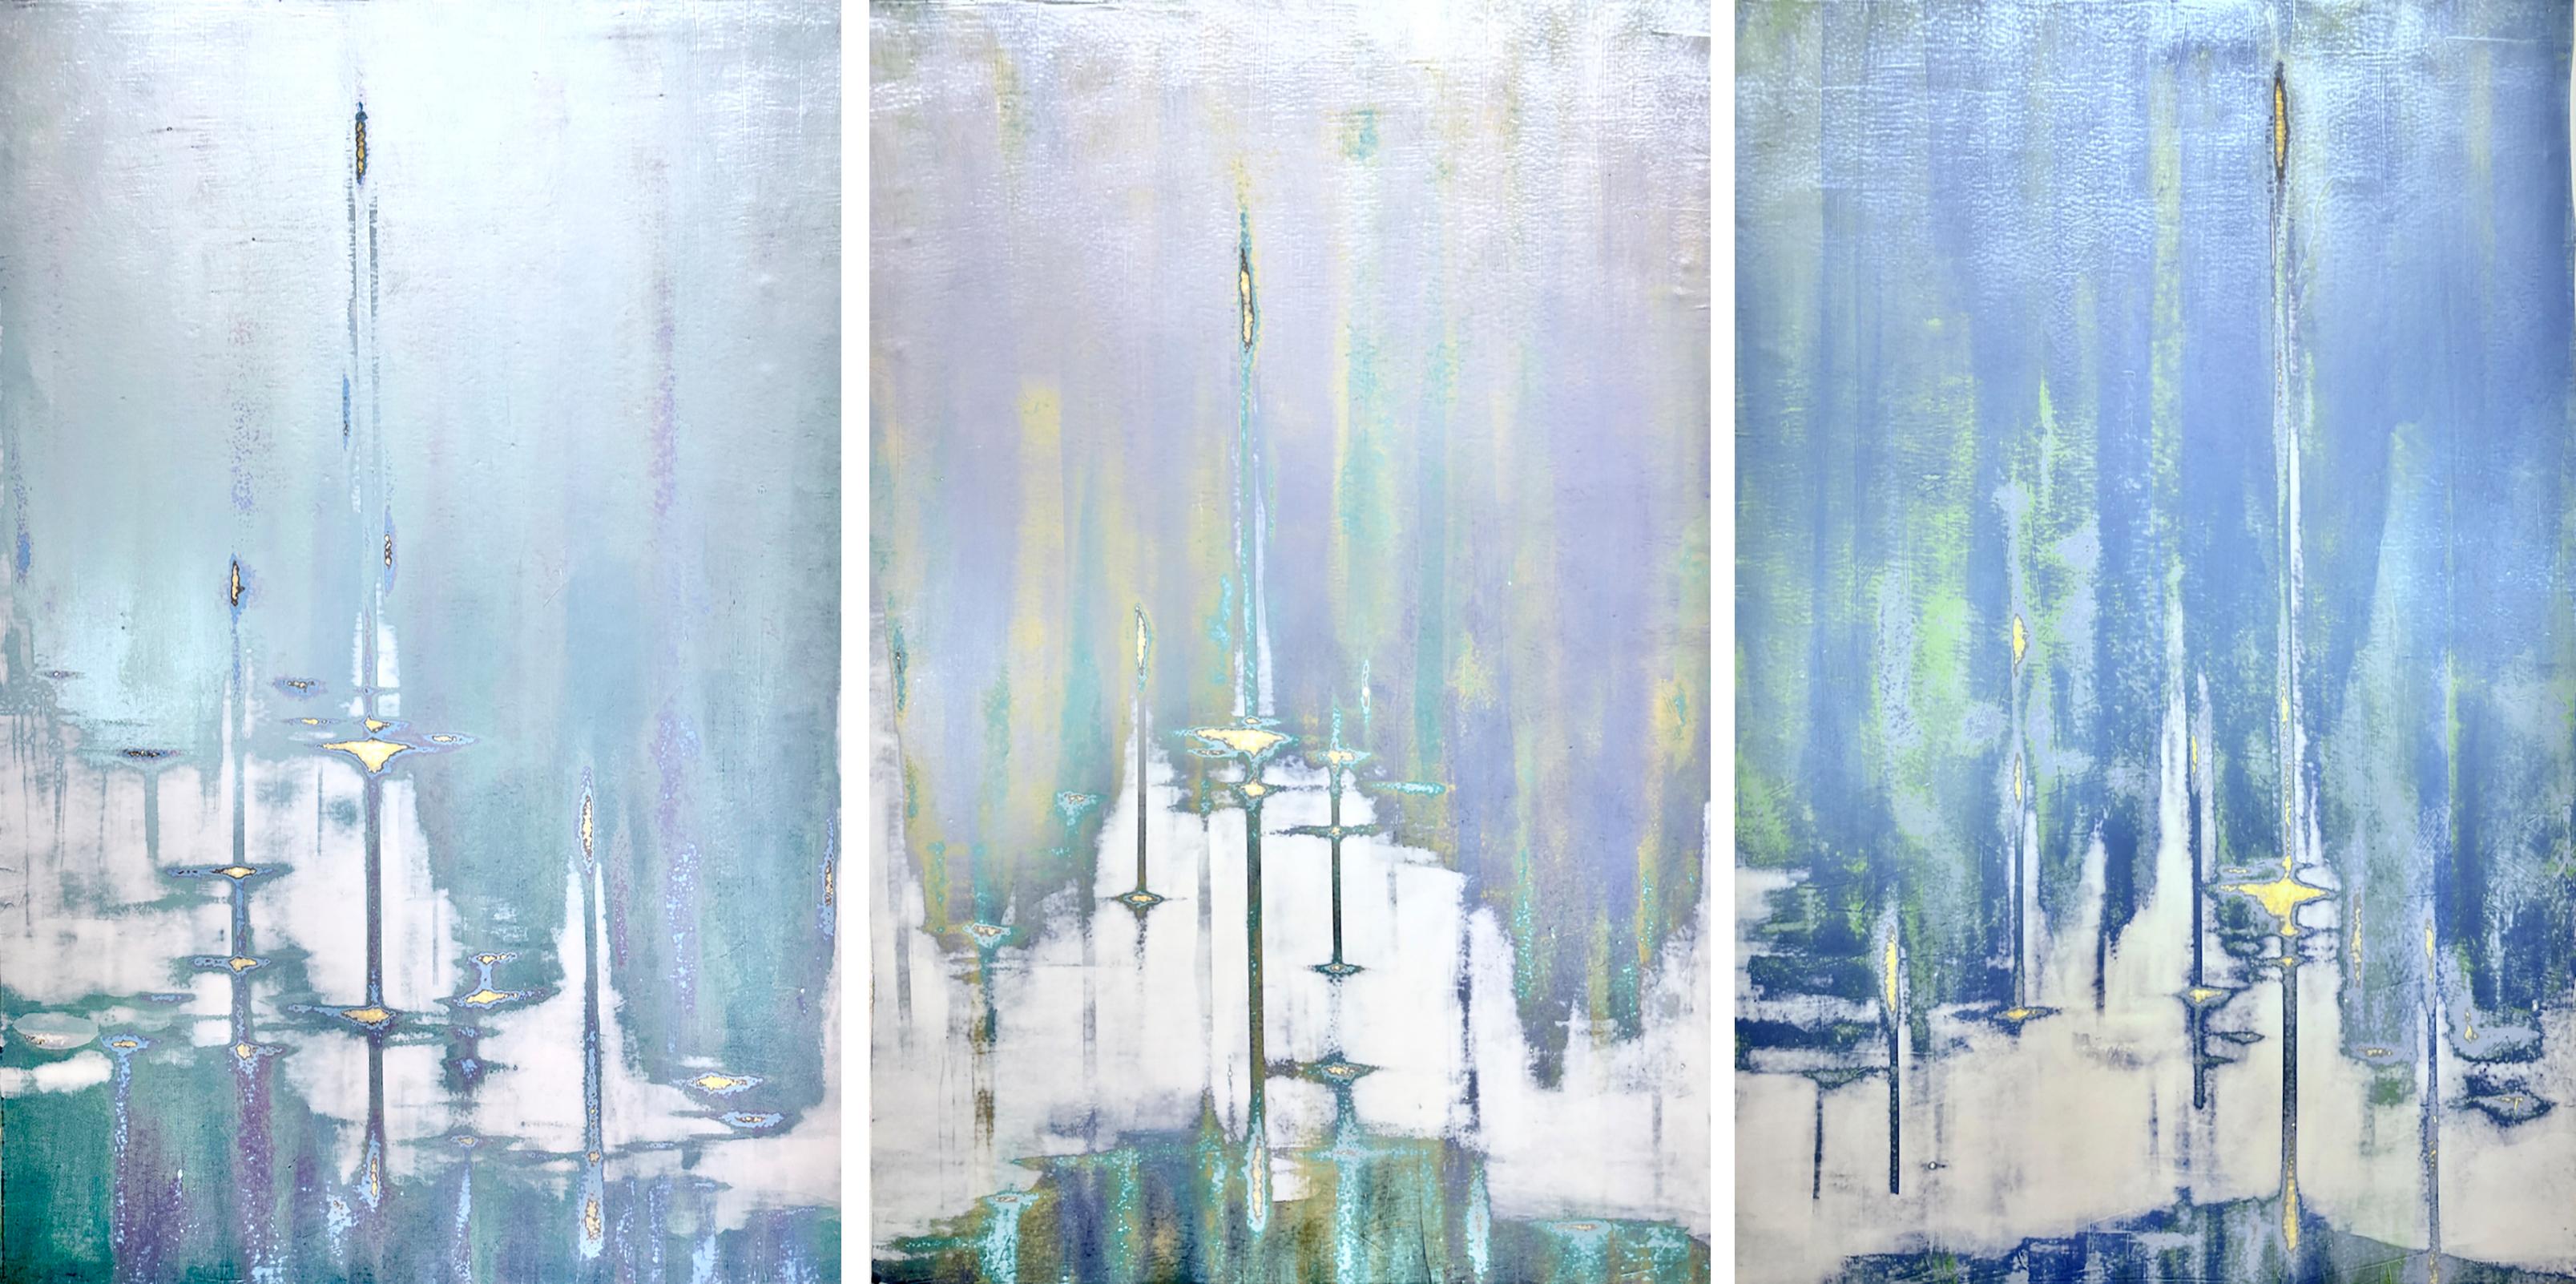 AUDRA WEASER
"Pearl Dives (Triptych)"
Acrylic, Metallic Pigments, Plaster Paint on Canvas
60 x 40 in. Each; 60 x 120 in. Overall
___________________

Utilizing a minimalist color palette, Weaser’s process-based paintings are excavations of memories